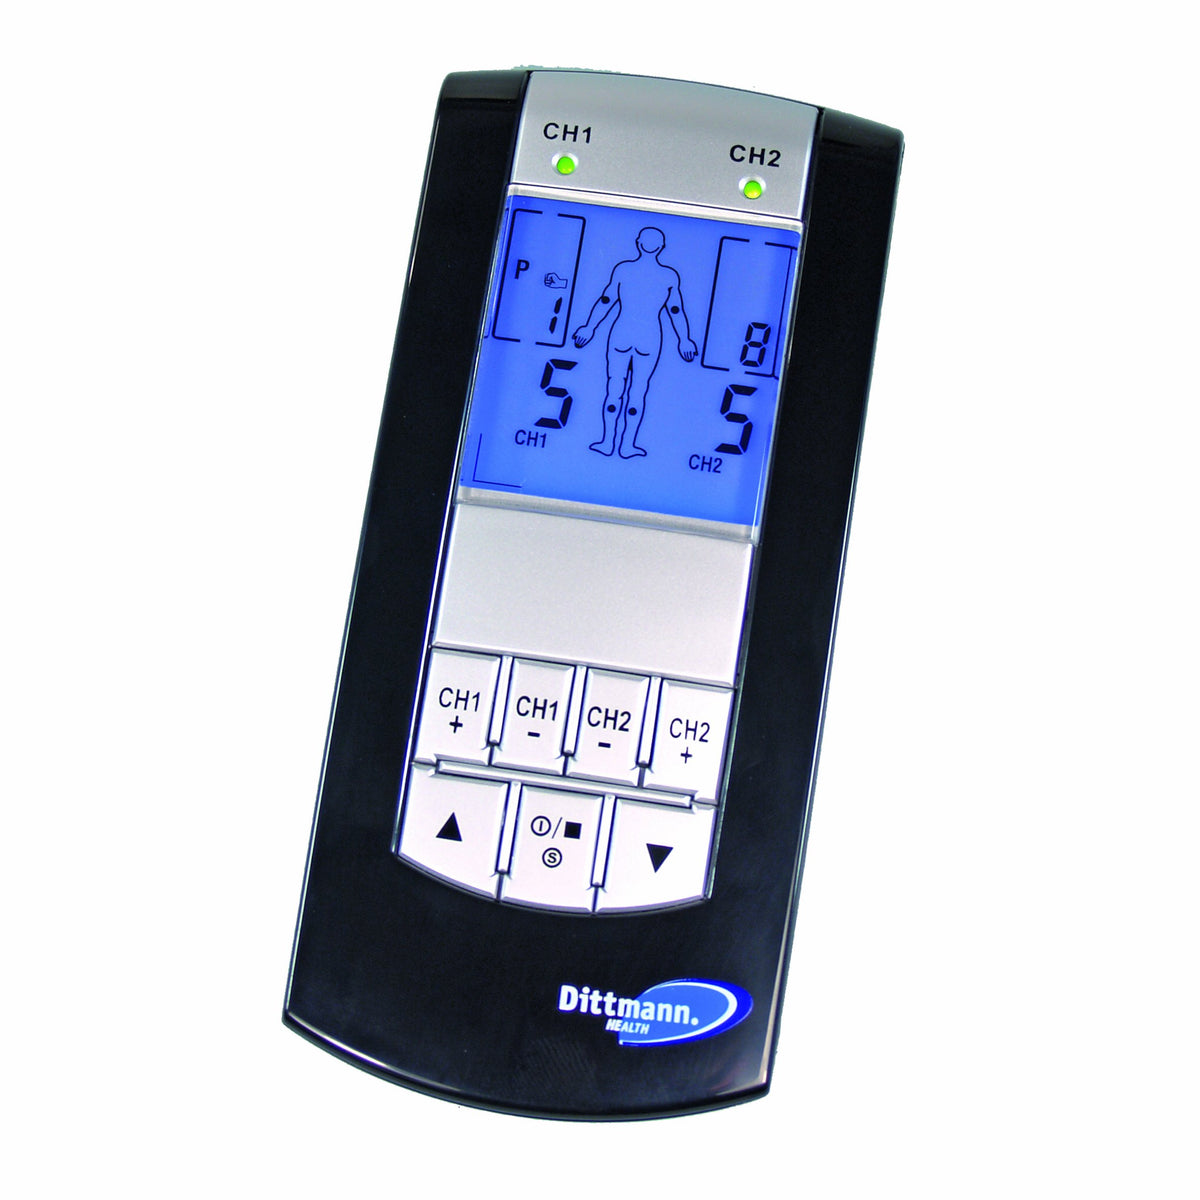 Dittmann Health TENS Machine, Natural Pain Relief Through Electronic Stimulation. Very Easy to use.